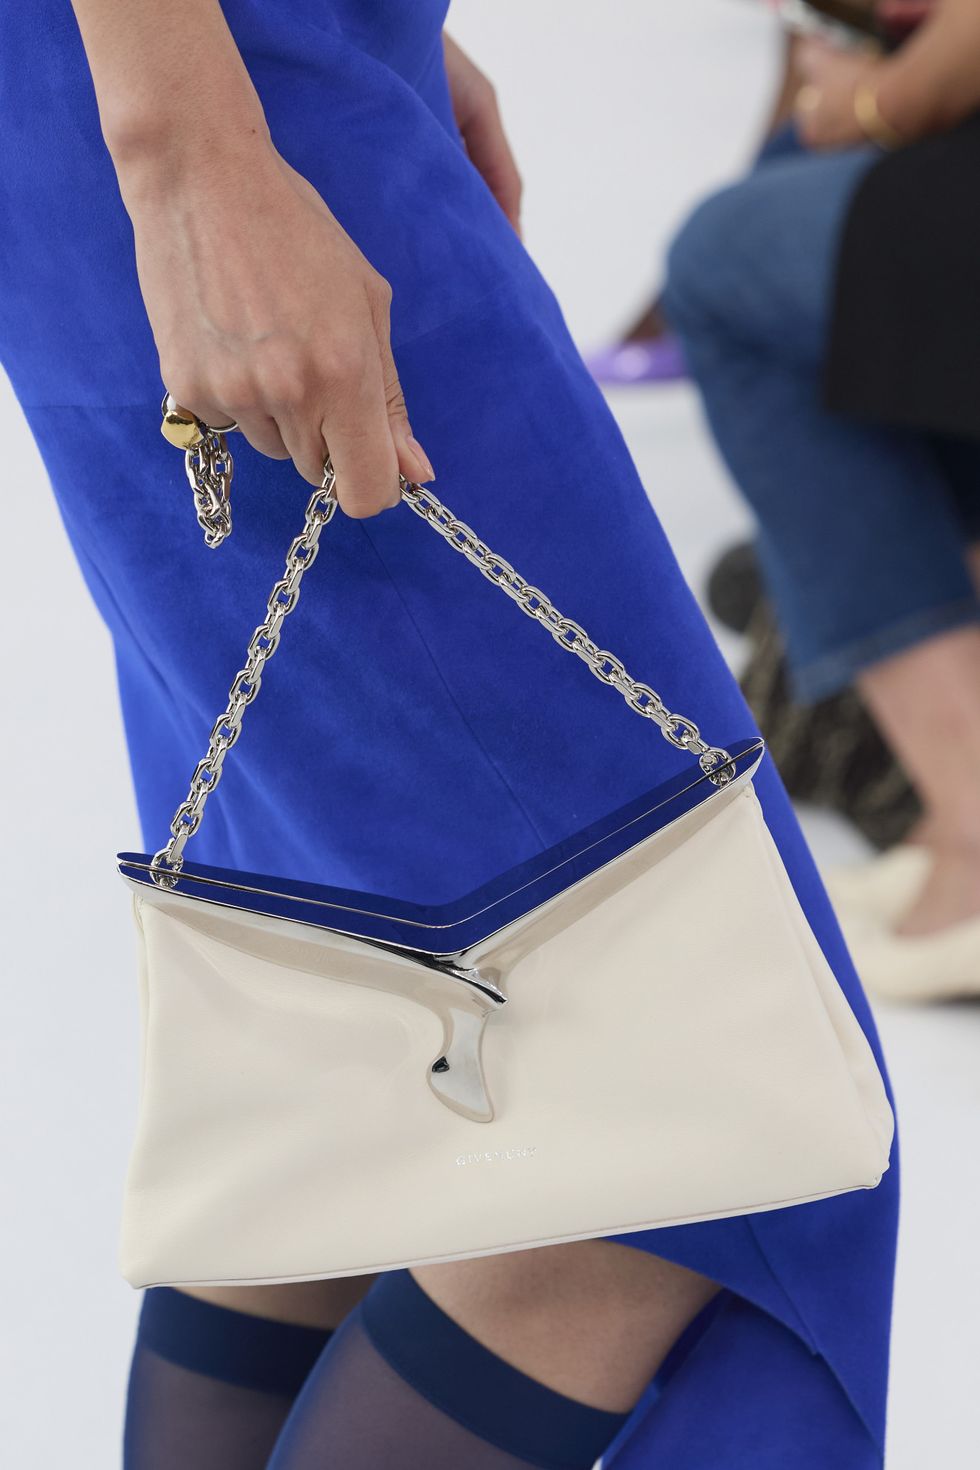 a person carrying a blue purse